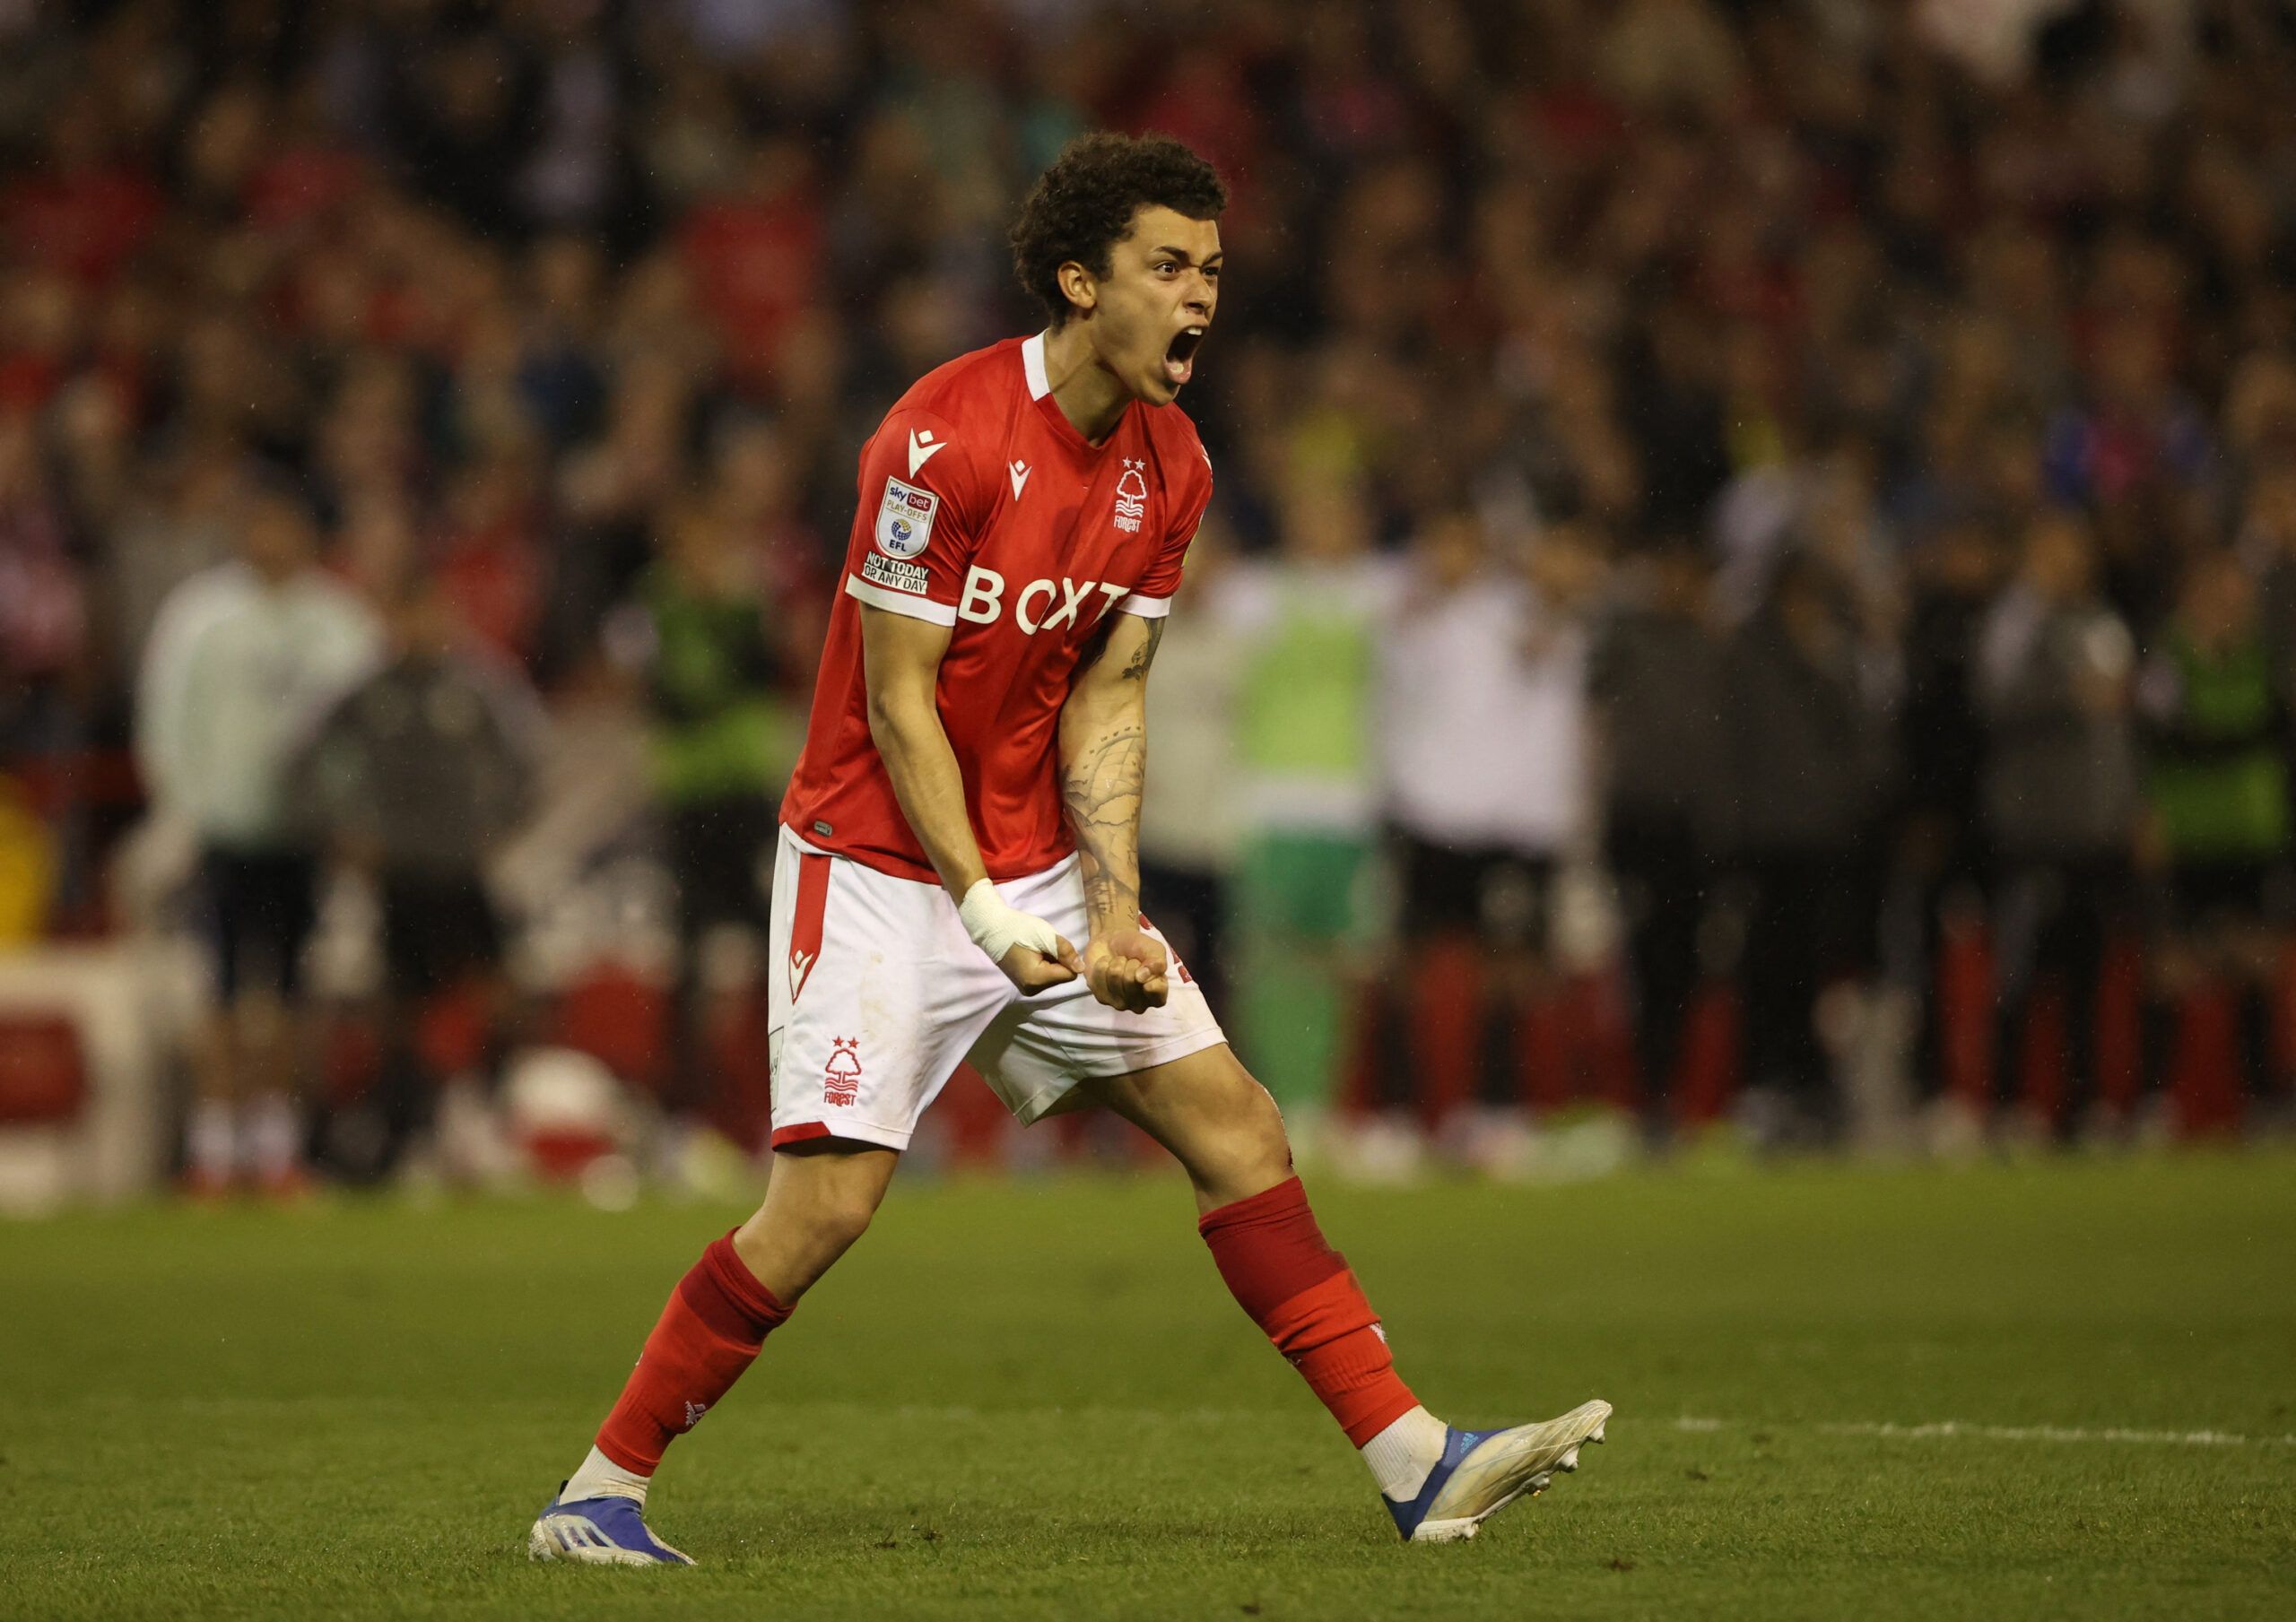 Soccer Football - Championship - Play-Offs Second Leg - Nottingham Forest v Sheffield United - The City Ground, Nottingham, Britain - May 17, 2022 Nottingham Forest's Brennan Johnson celebrates after scoring his penalty during the shoot-out Action Images via Reuters/Molly Darlington